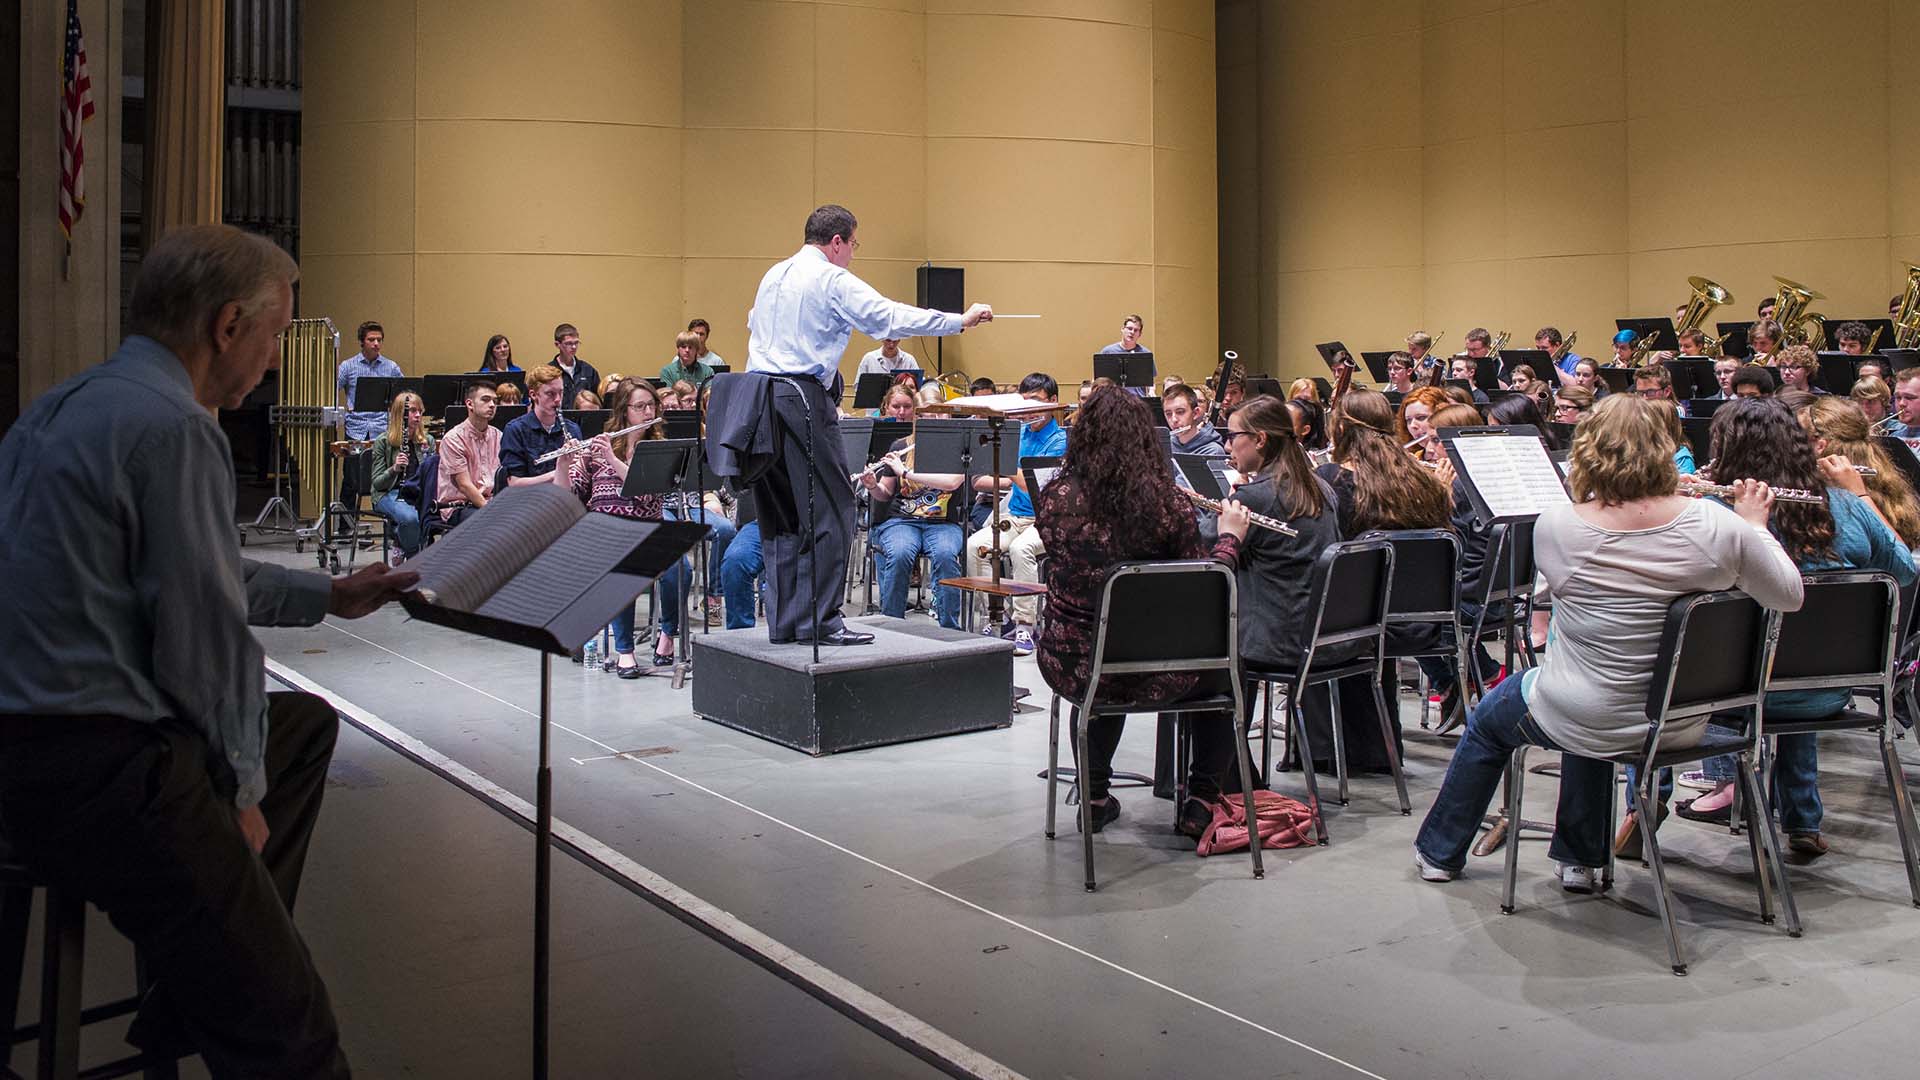 Spring Conference All-Star Band rehearsing with guest composer following the score seated on stage